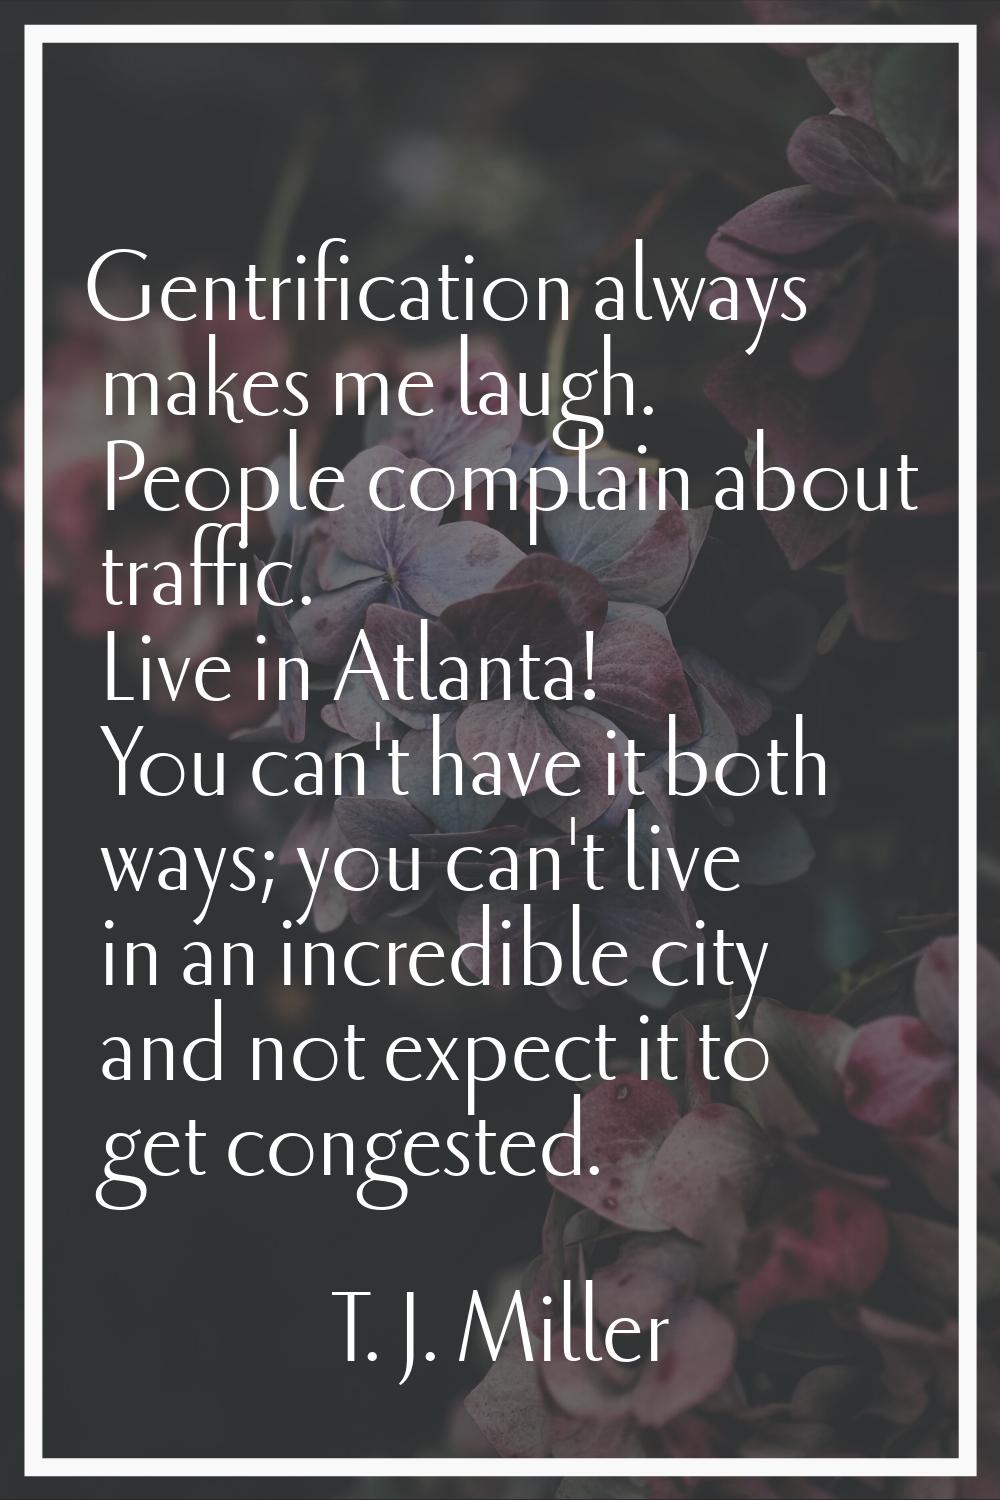 Gentrification always makes me laugh. People complain about traffic. Live in Atlanta! You can't hav